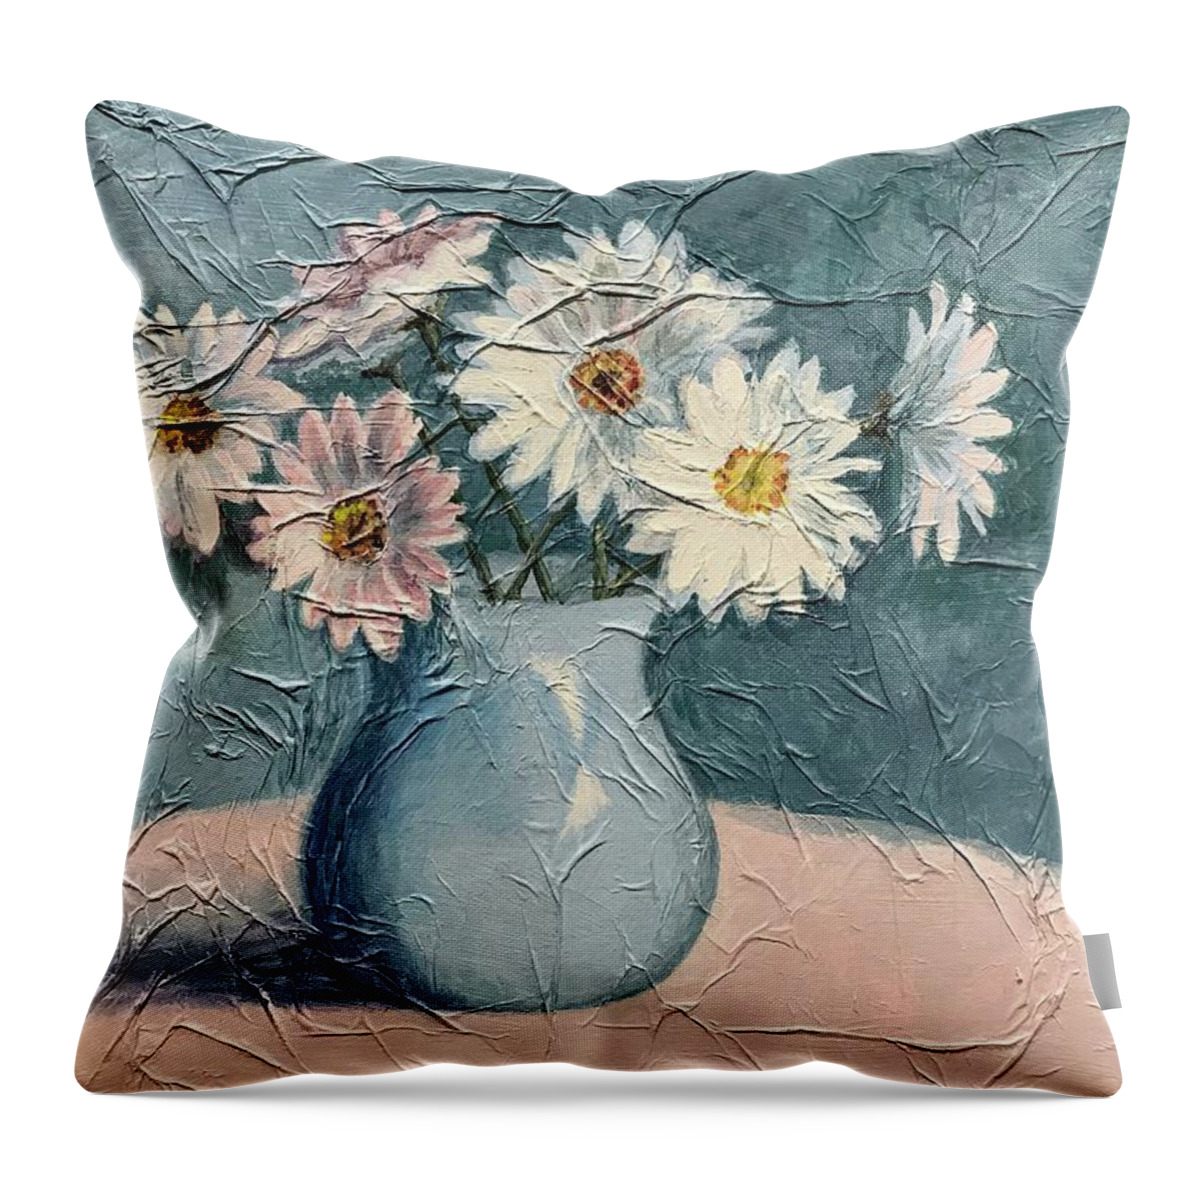 Daisies Throw Pillow featuring the painting Daisies by Janet King